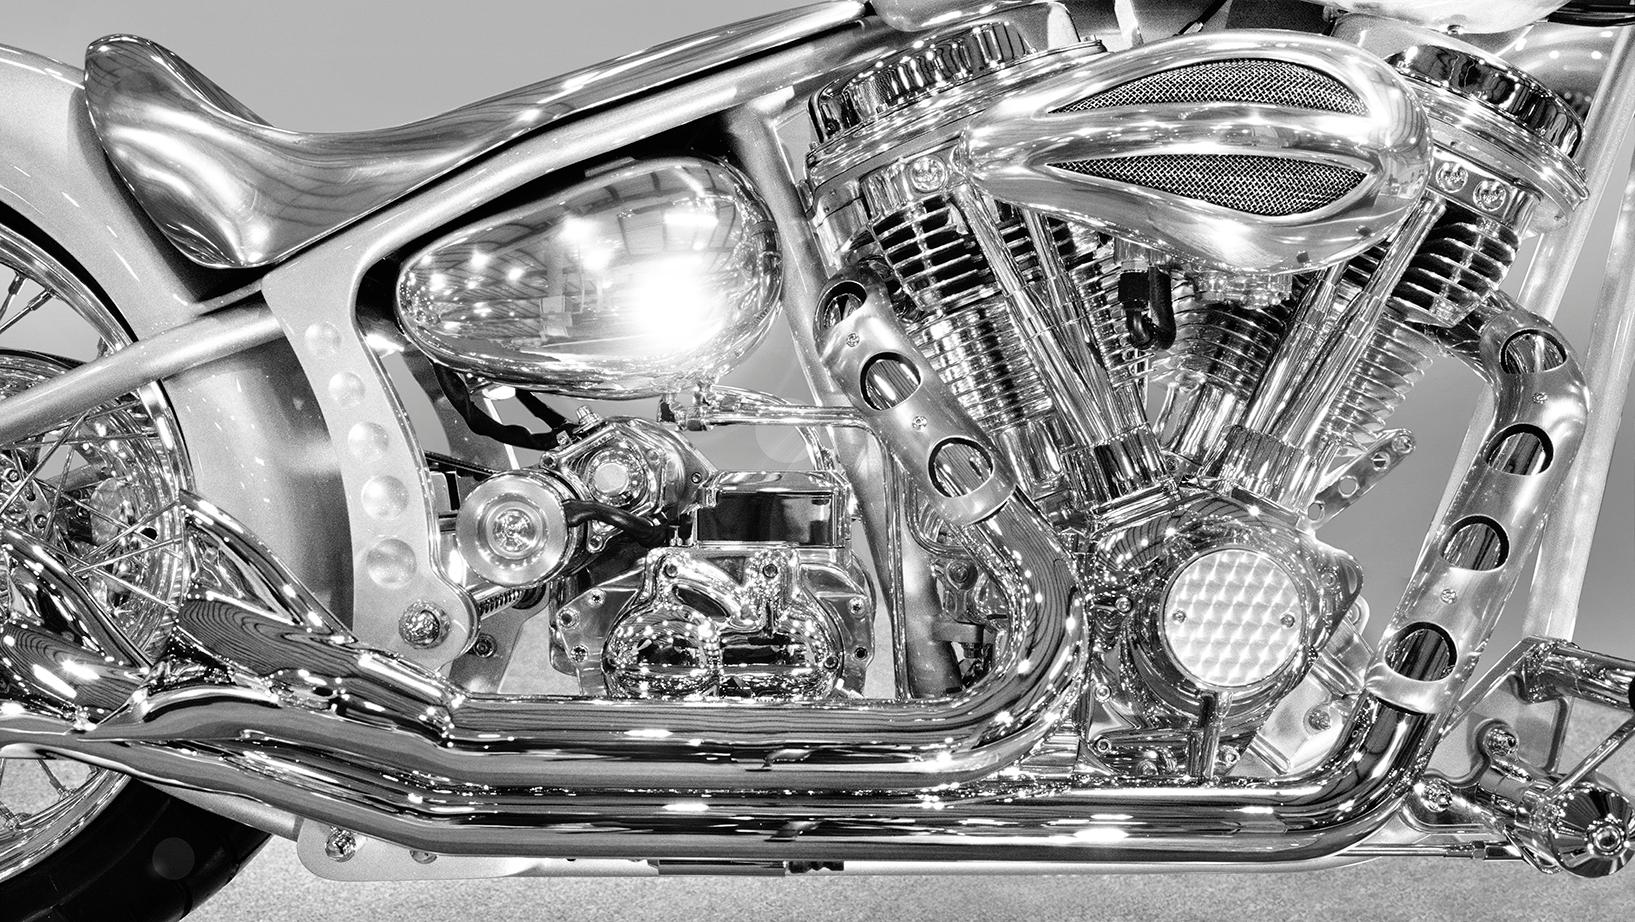 Frank Schott Black and White Photograph - Chopper 2003 - large format photograph of iconic Harley Davidson chrome details